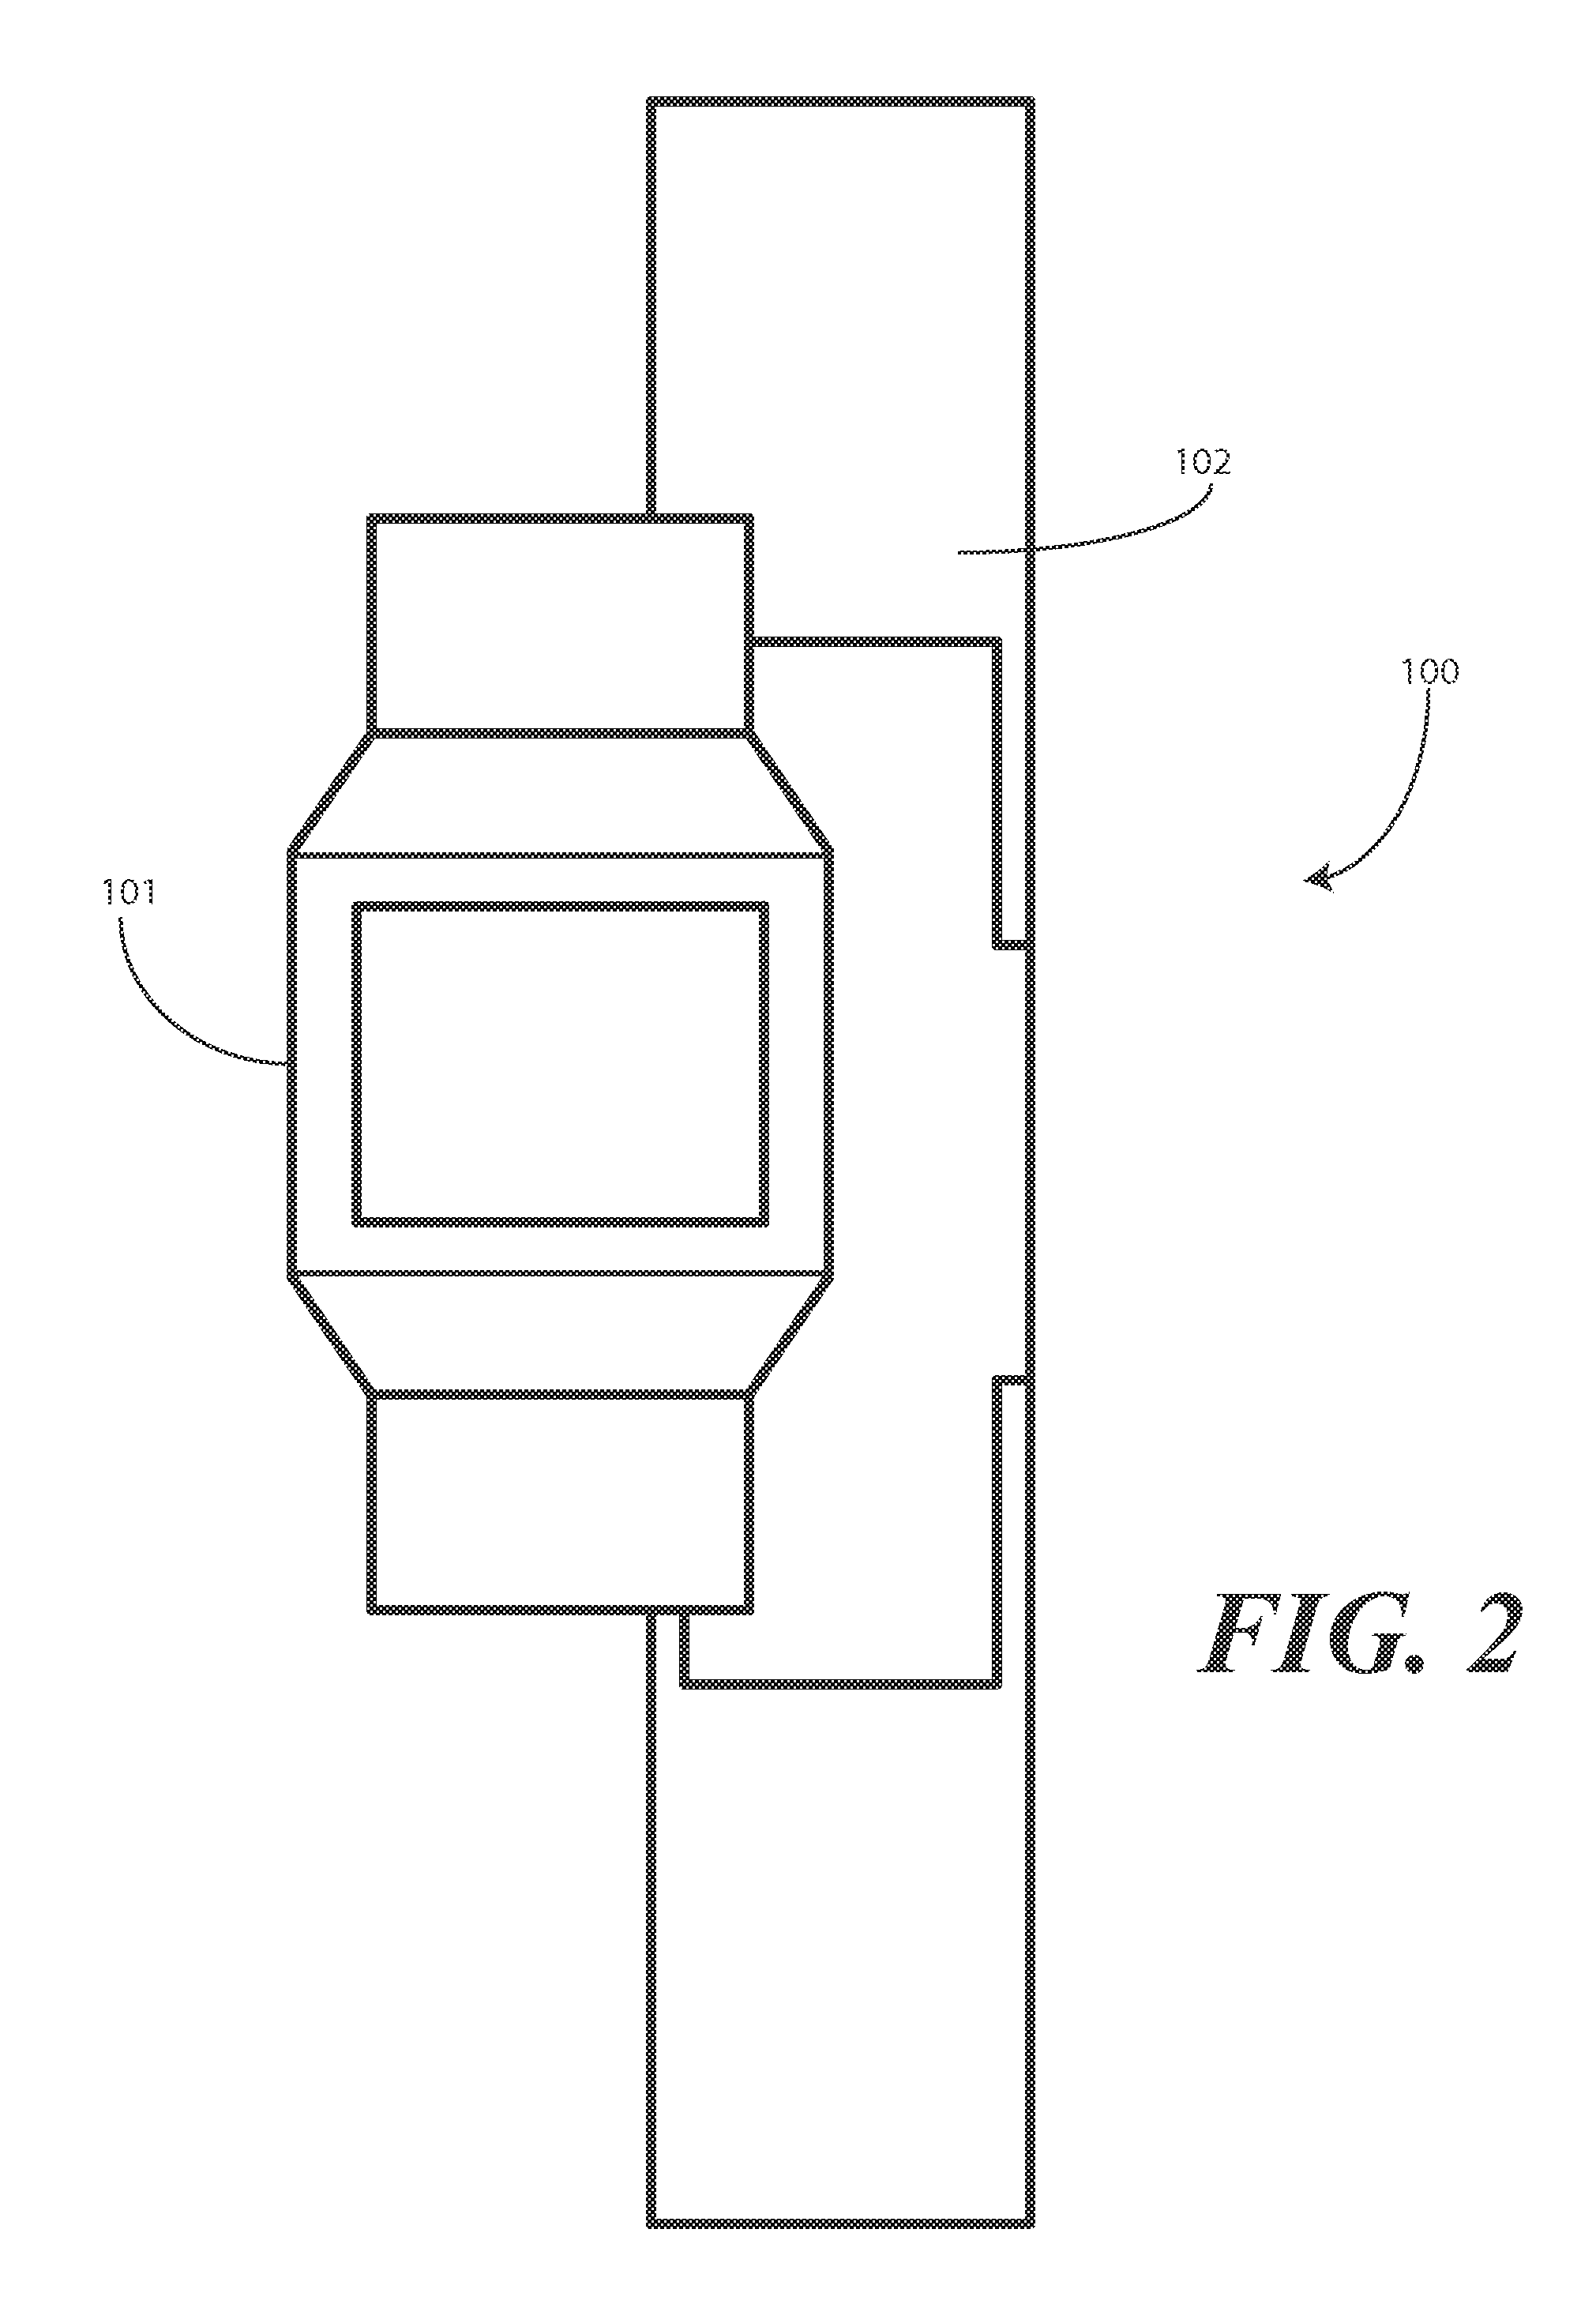 Display device, corresponding systems, and methods therefor